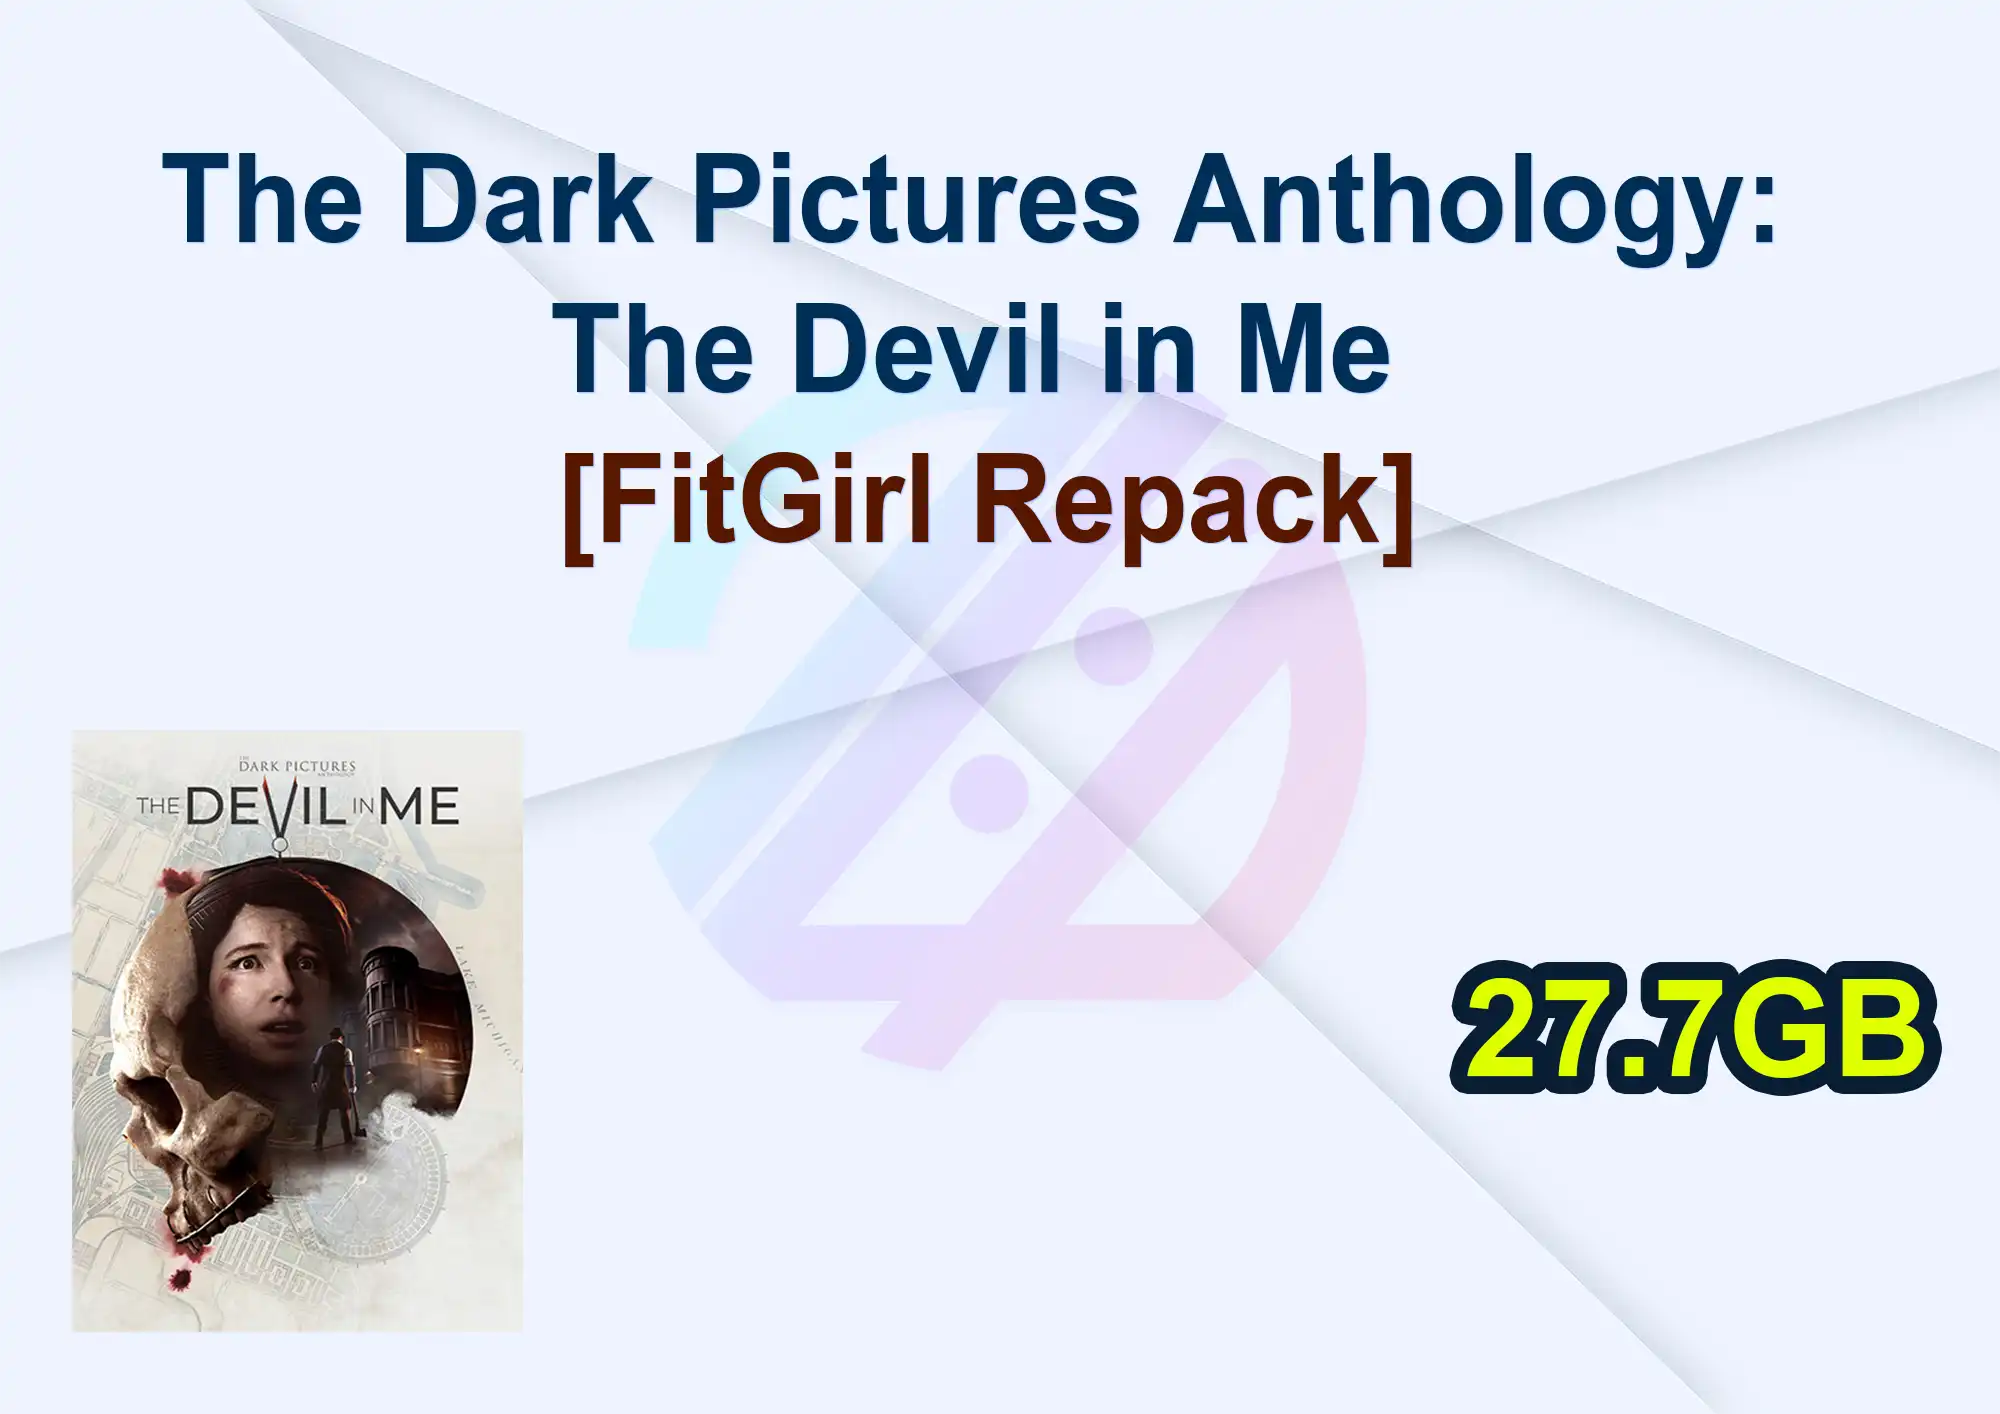 The Dark Pictures Anthology: The Devil in Me (+ DLC + Online Co-op, MULTi11) [FitGirl Repack]